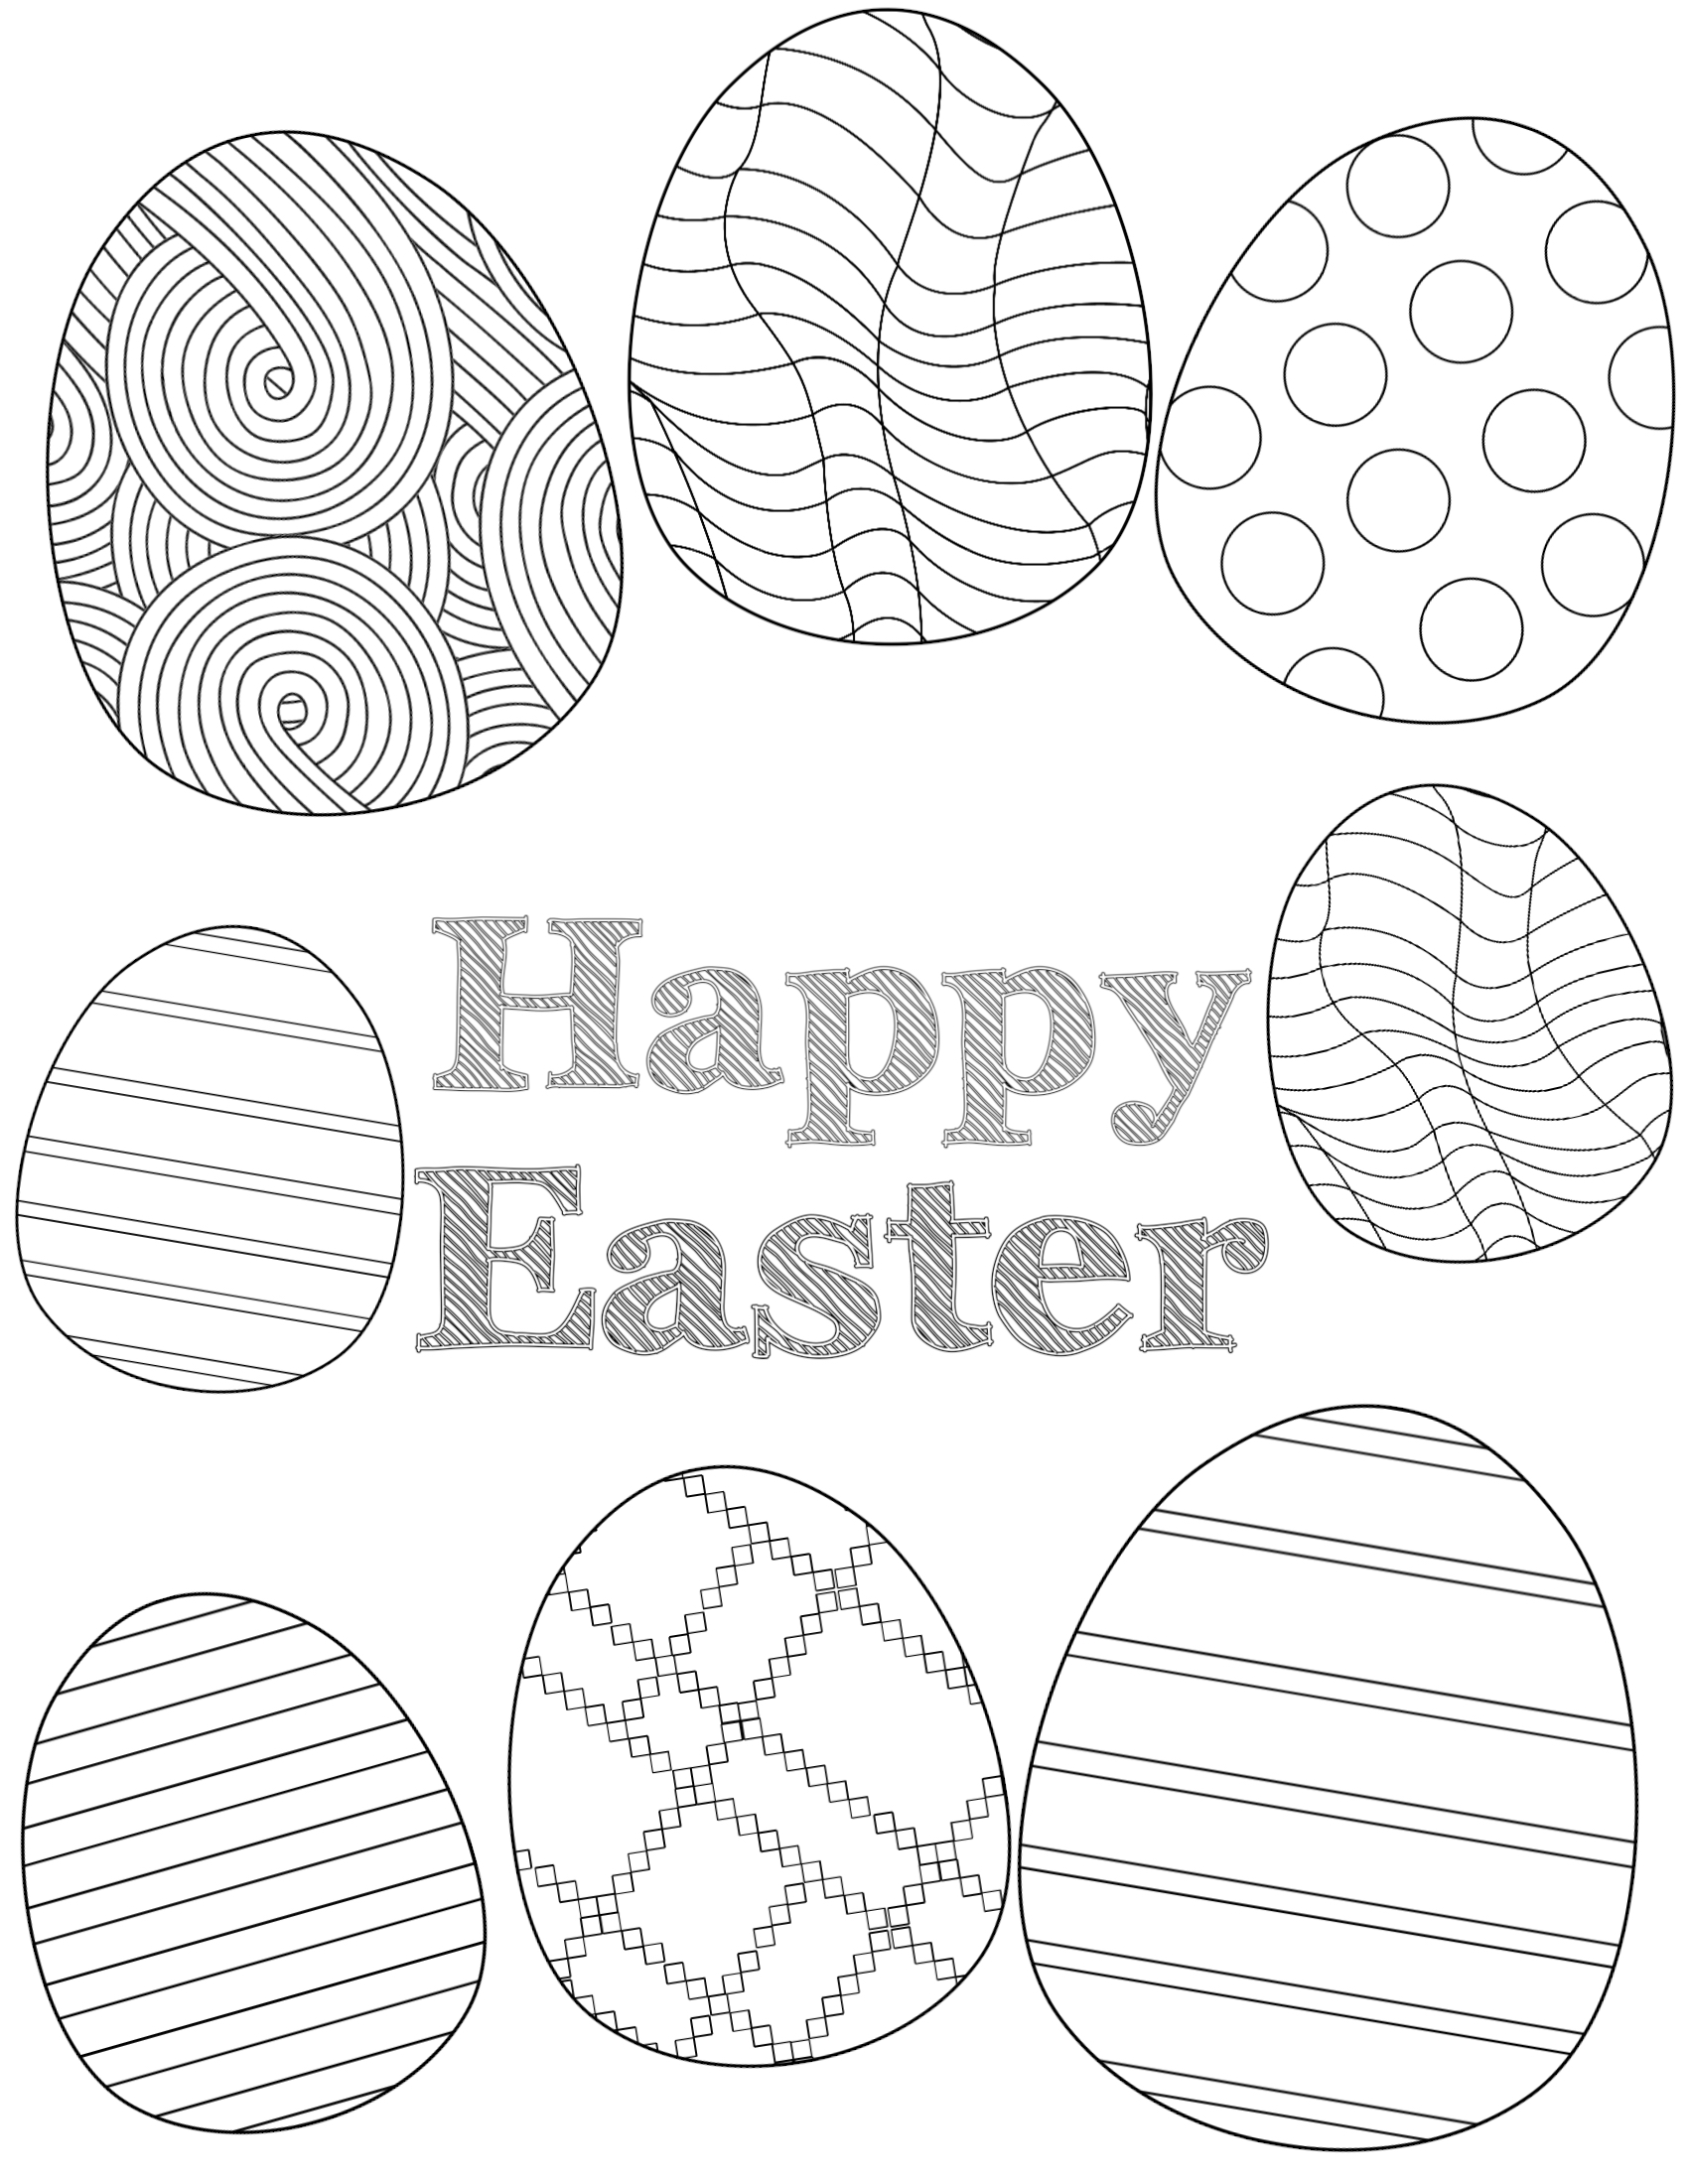 happy easter coloring pages printable